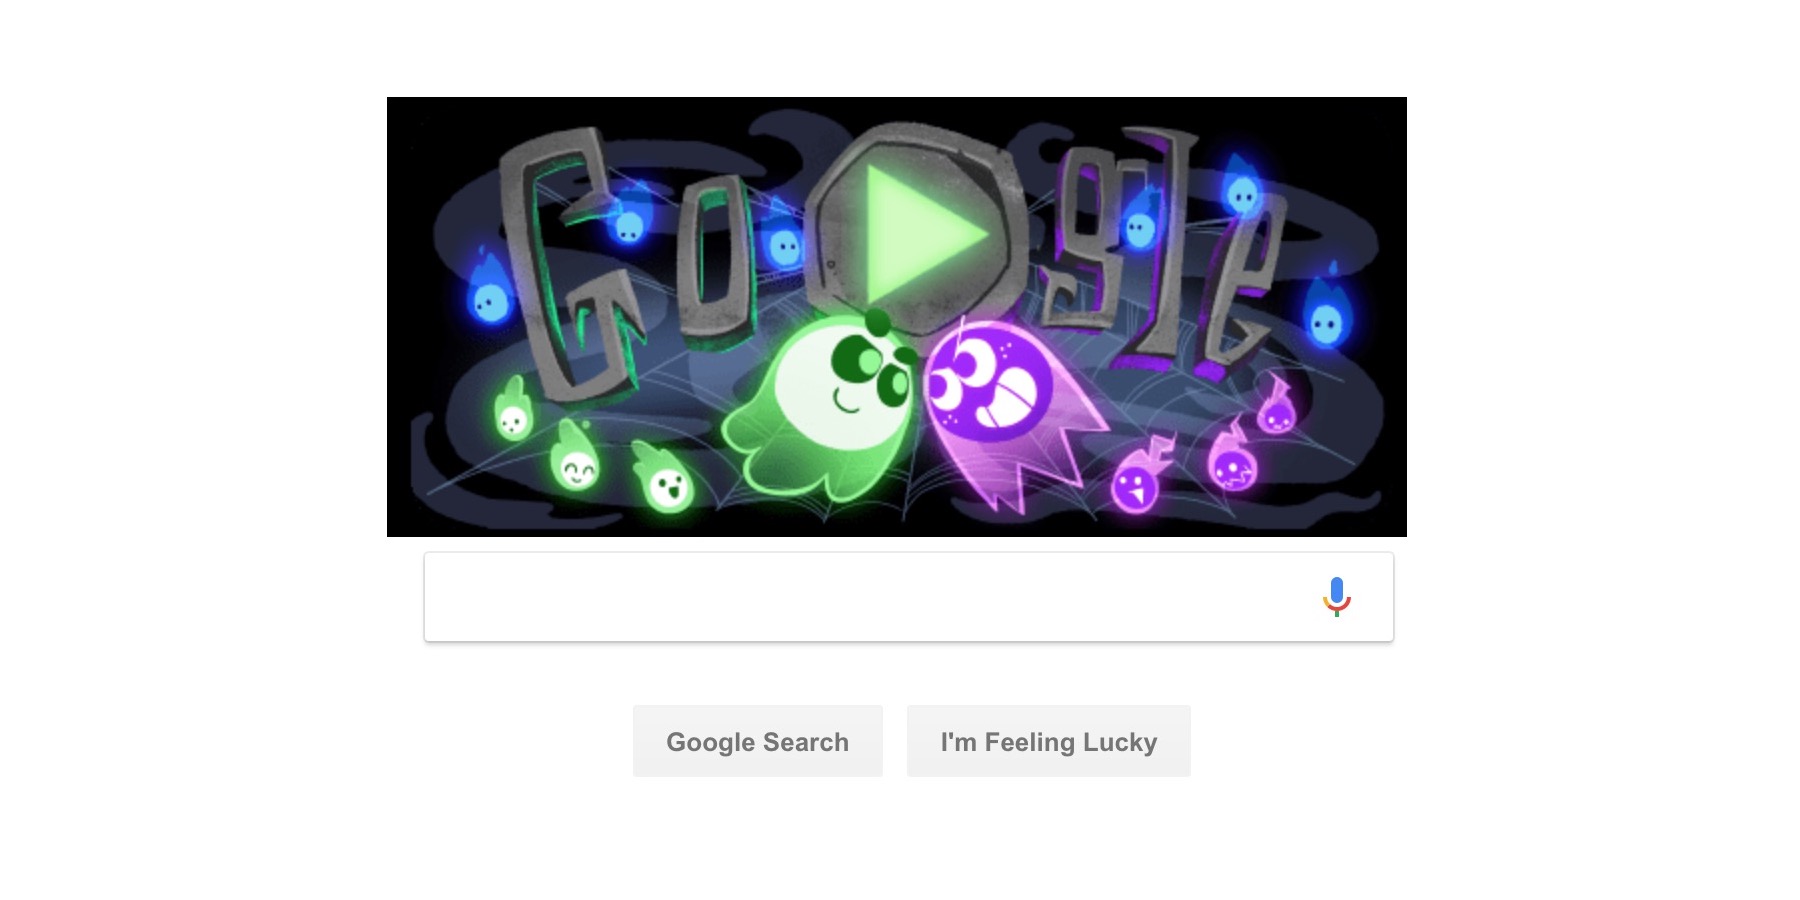 Google Celebrates Halloween With First-Ever Multiplayer Google Doodle